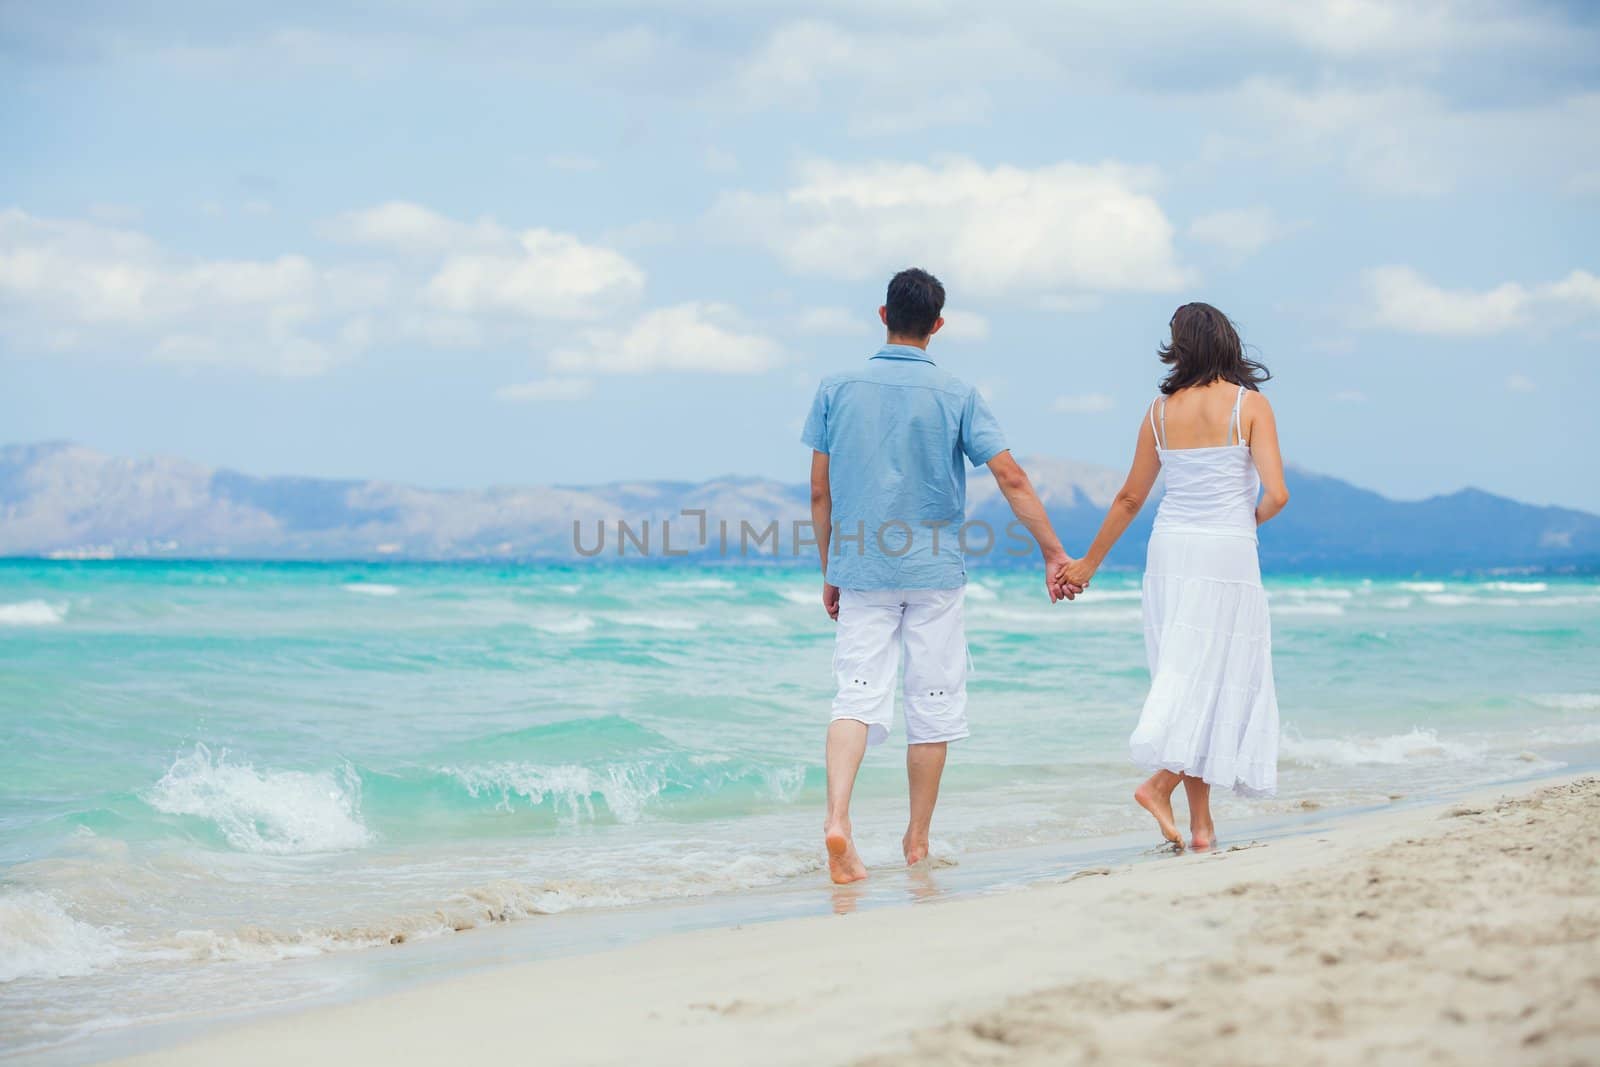 Back view of happy young couple walking on a deserted tropical beach with bright clear blue sky